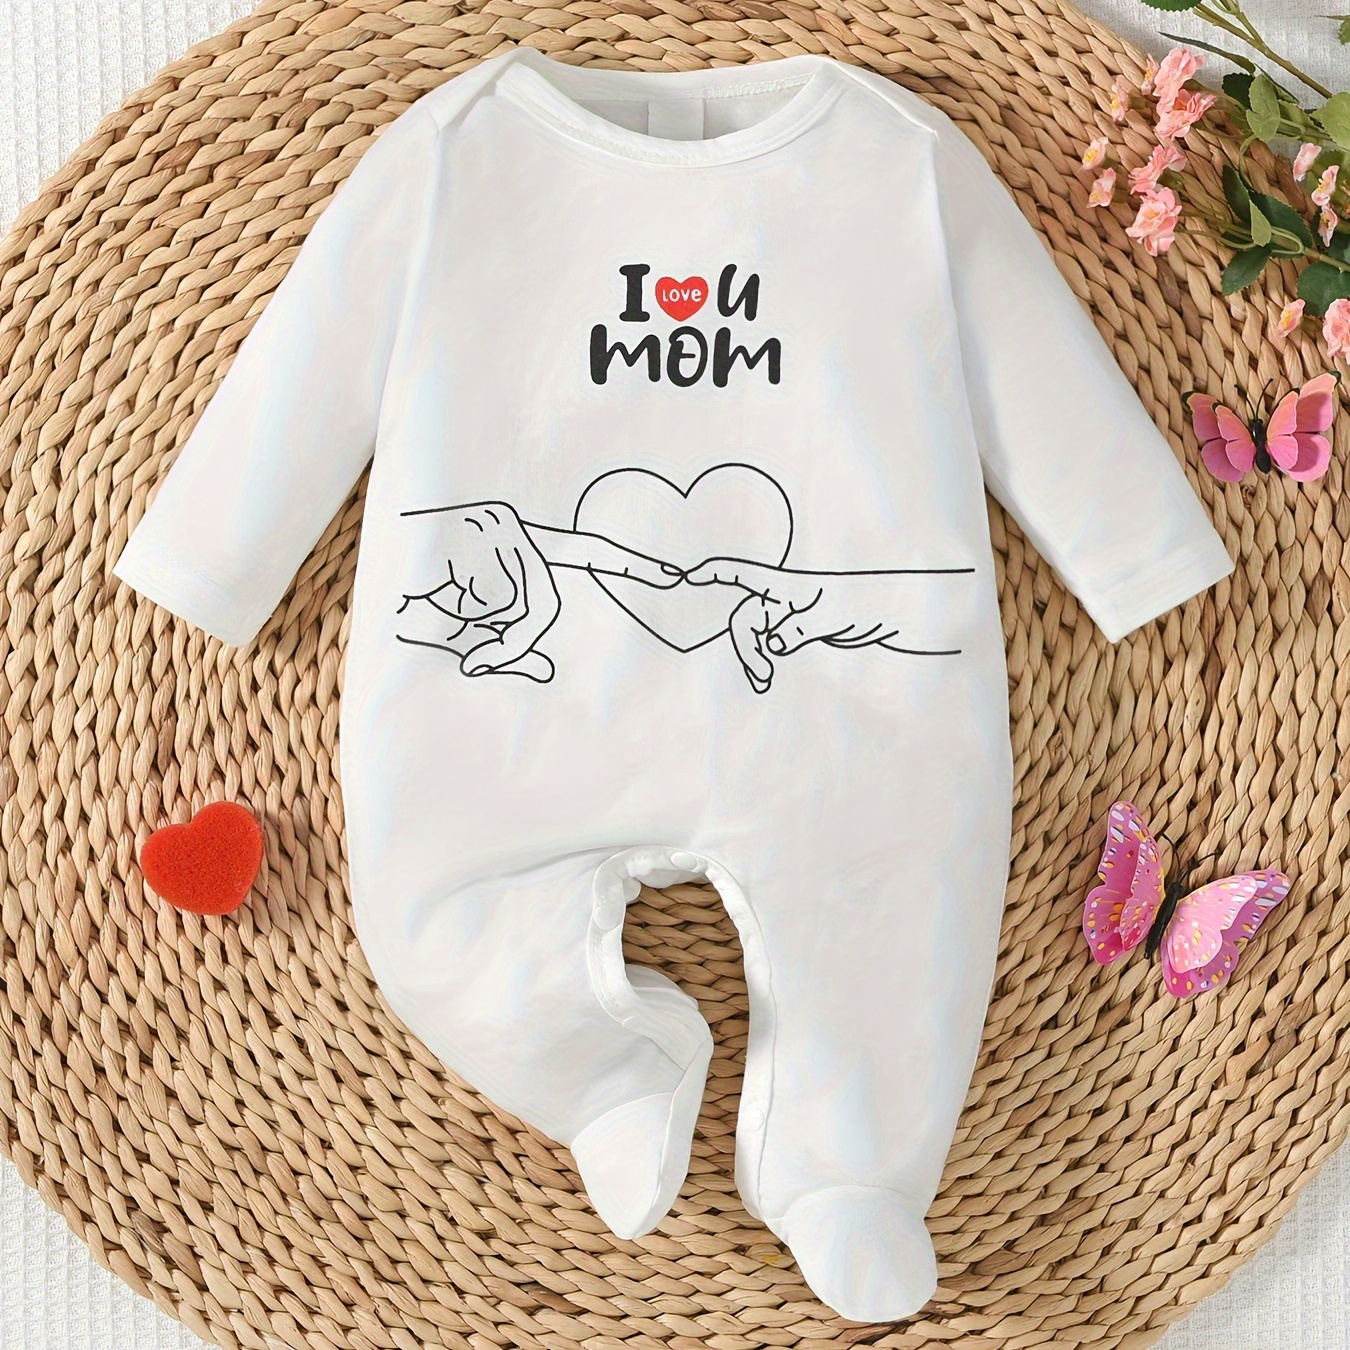 

Infant Boy's Cotton Long Sleeve Onesie, " Mom" Print, Casual Newborn Bodysuit, Soft Cotton, Cozy Baby Romper, White - Perfect For Mother's Day Gift